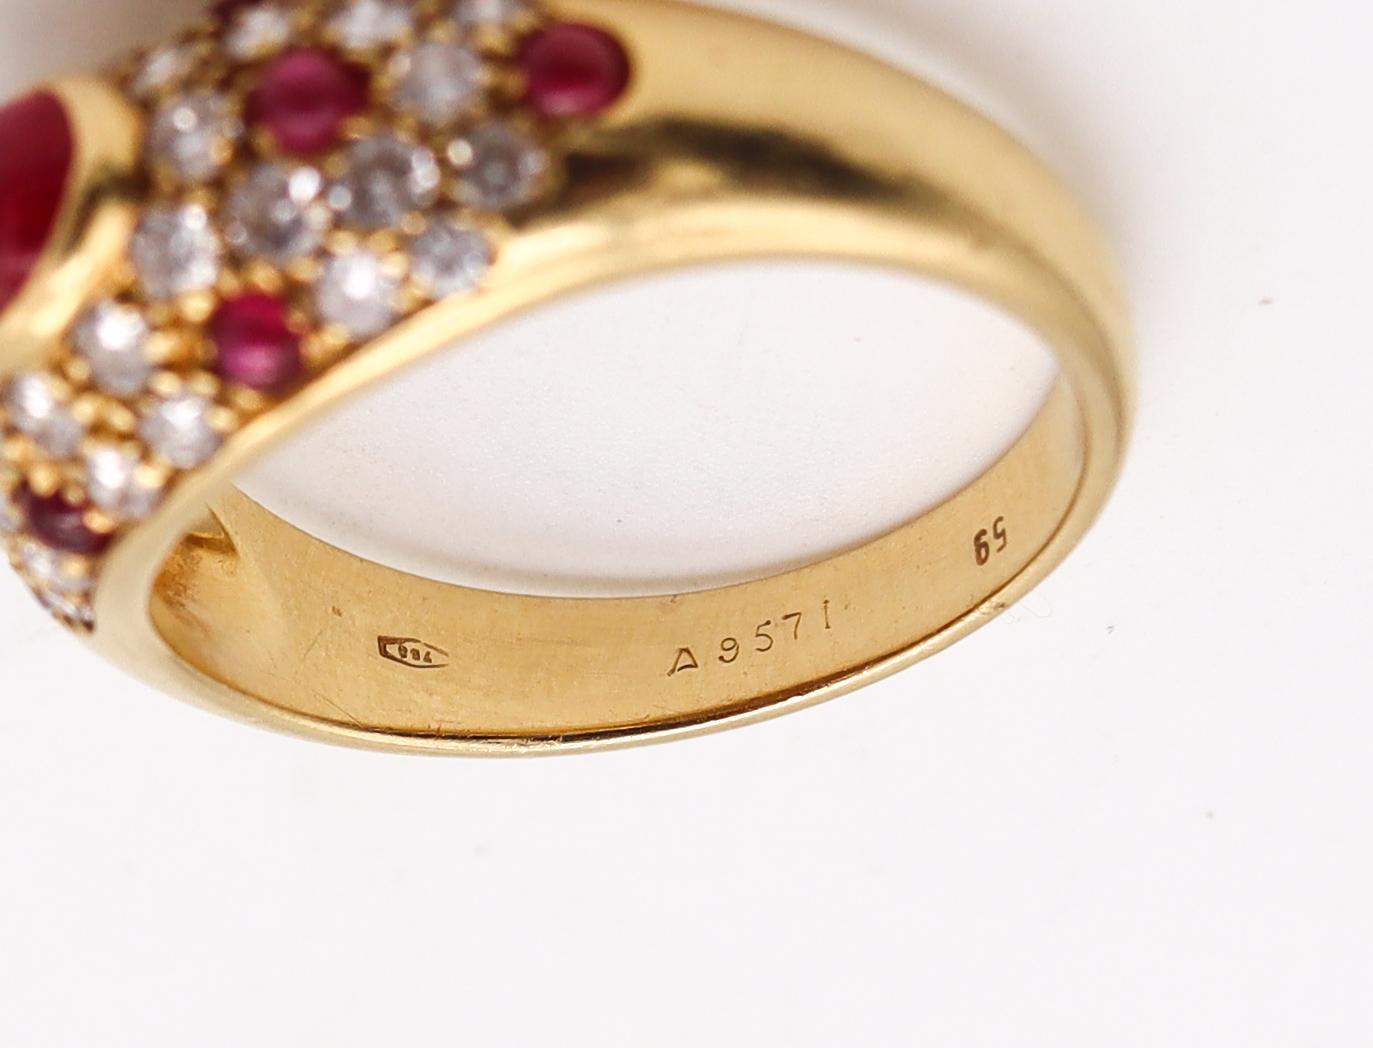 Brilliant Cut Cartier Paris 1970 Corinth Ring in 18kt Gold with 2.83ctw in Diamonds & Rubies